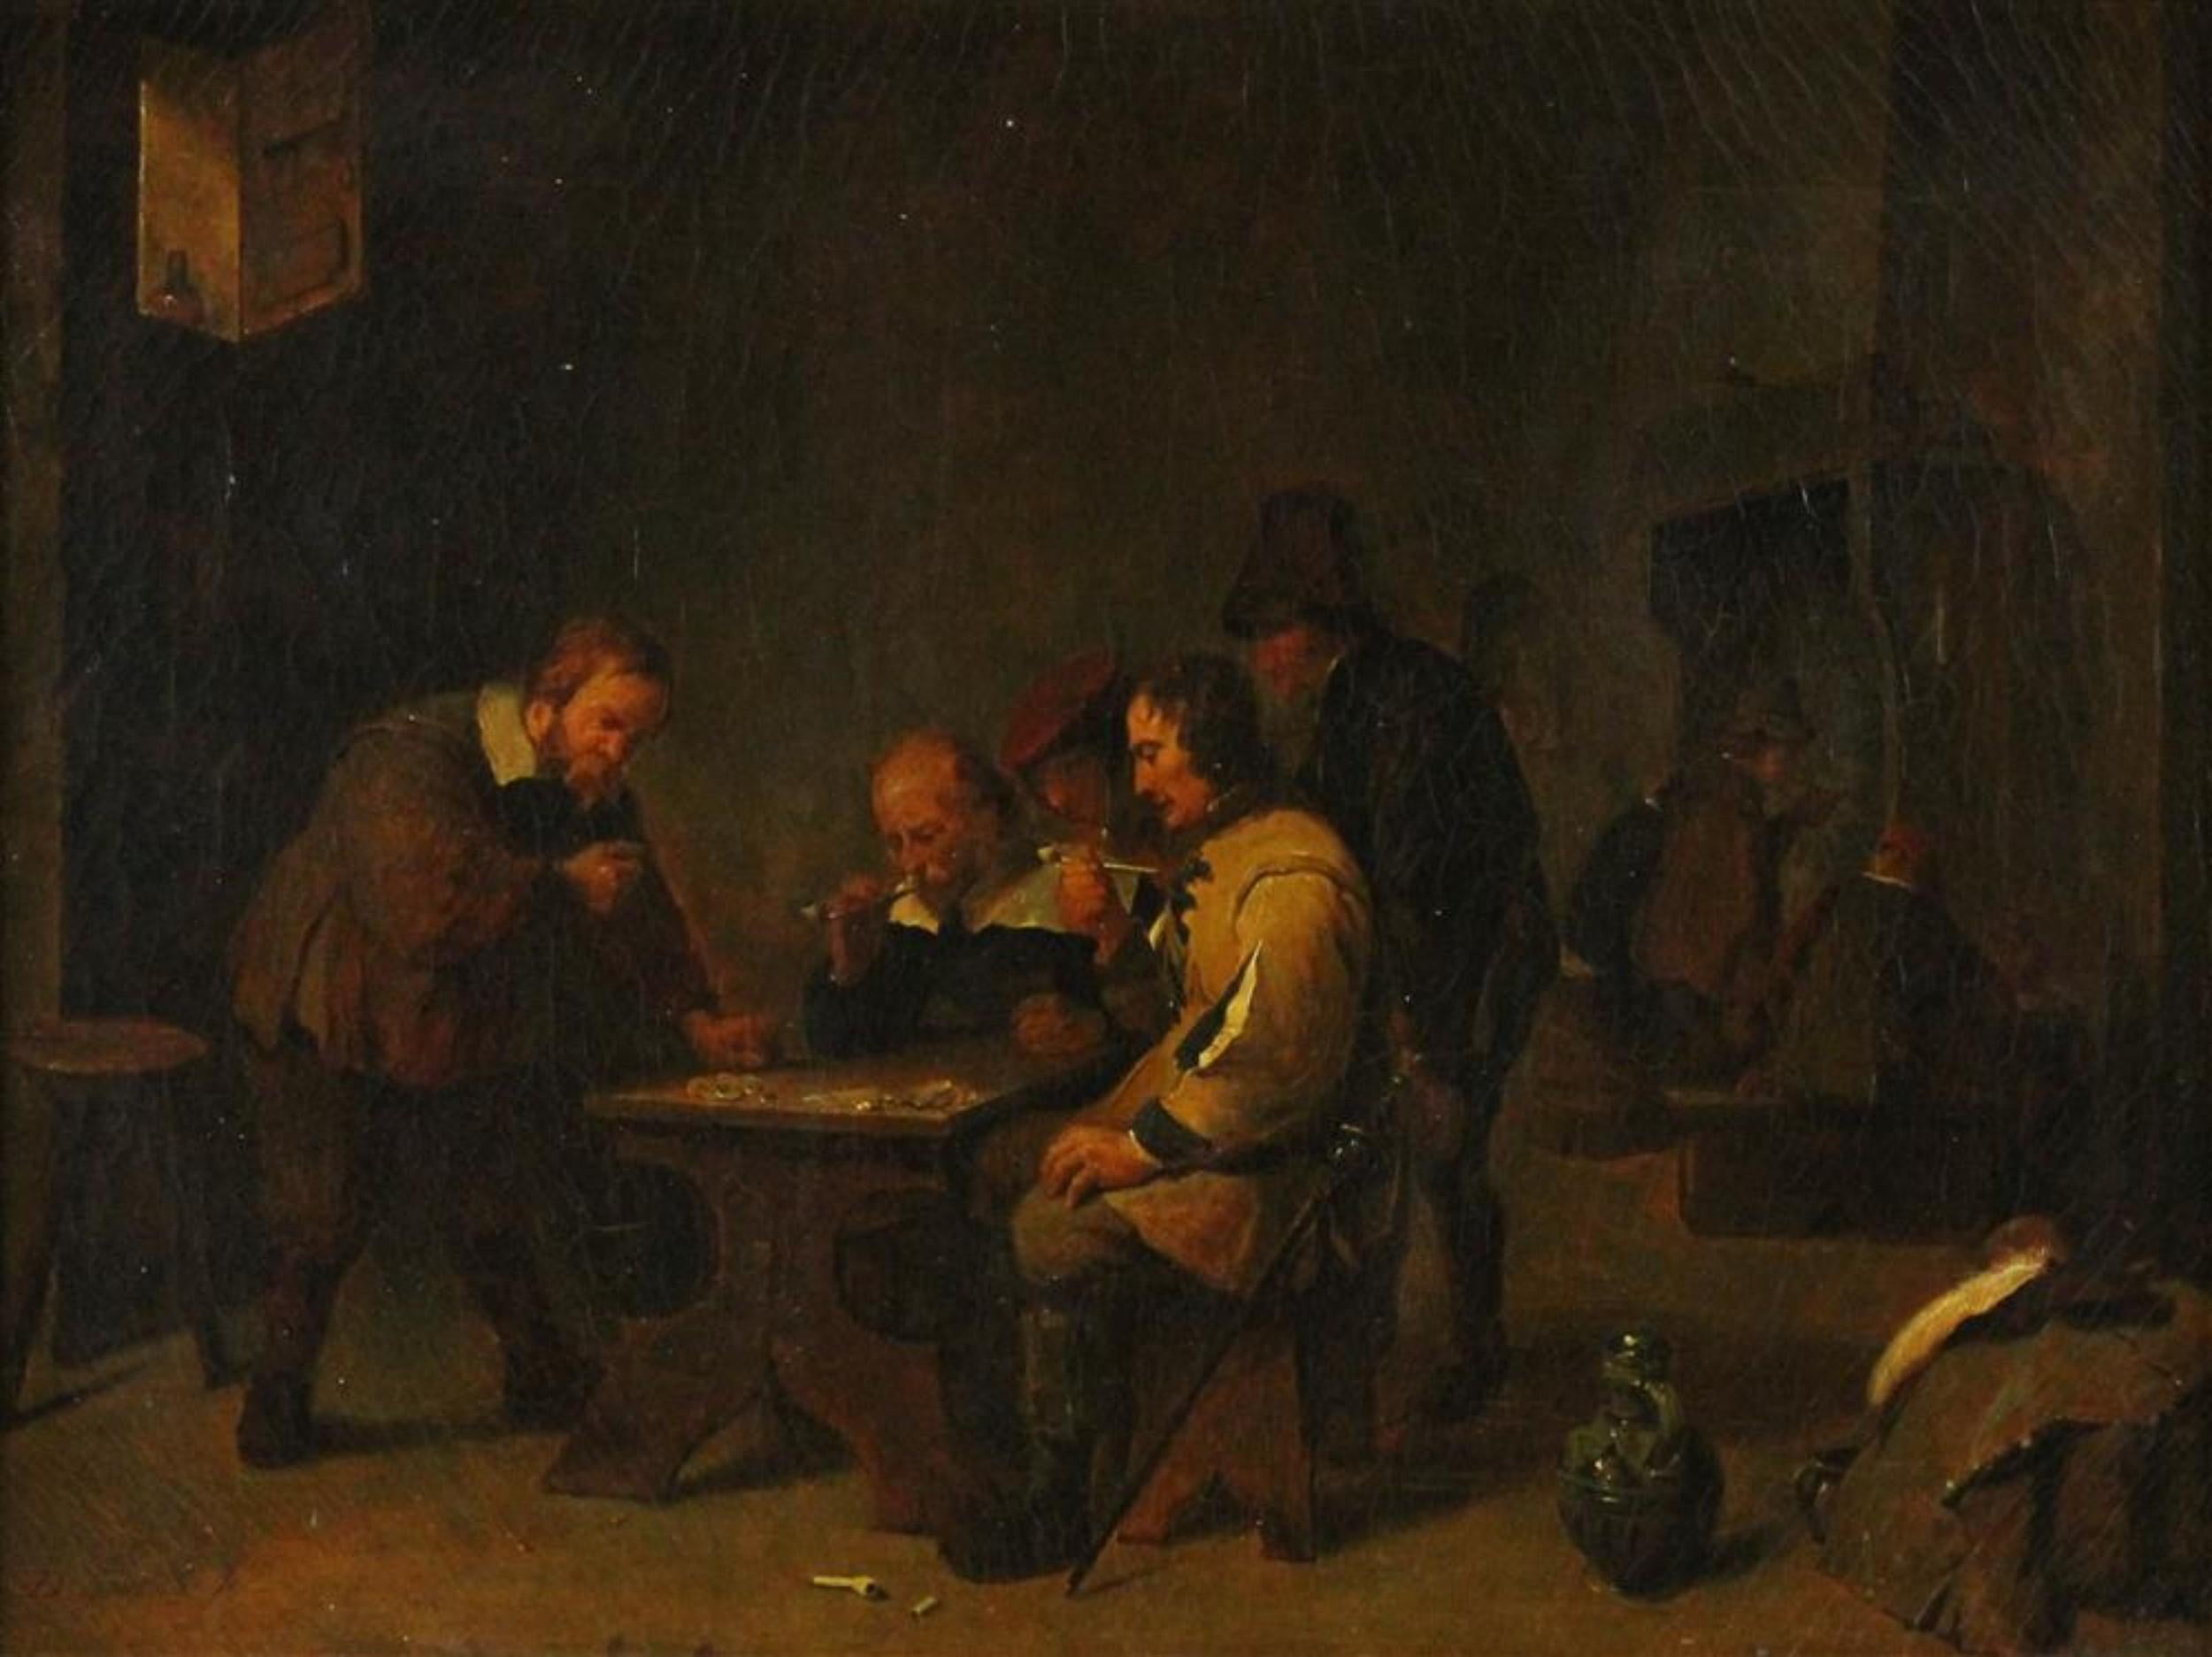 Interior Scene - Painting by David Teniers the Younger